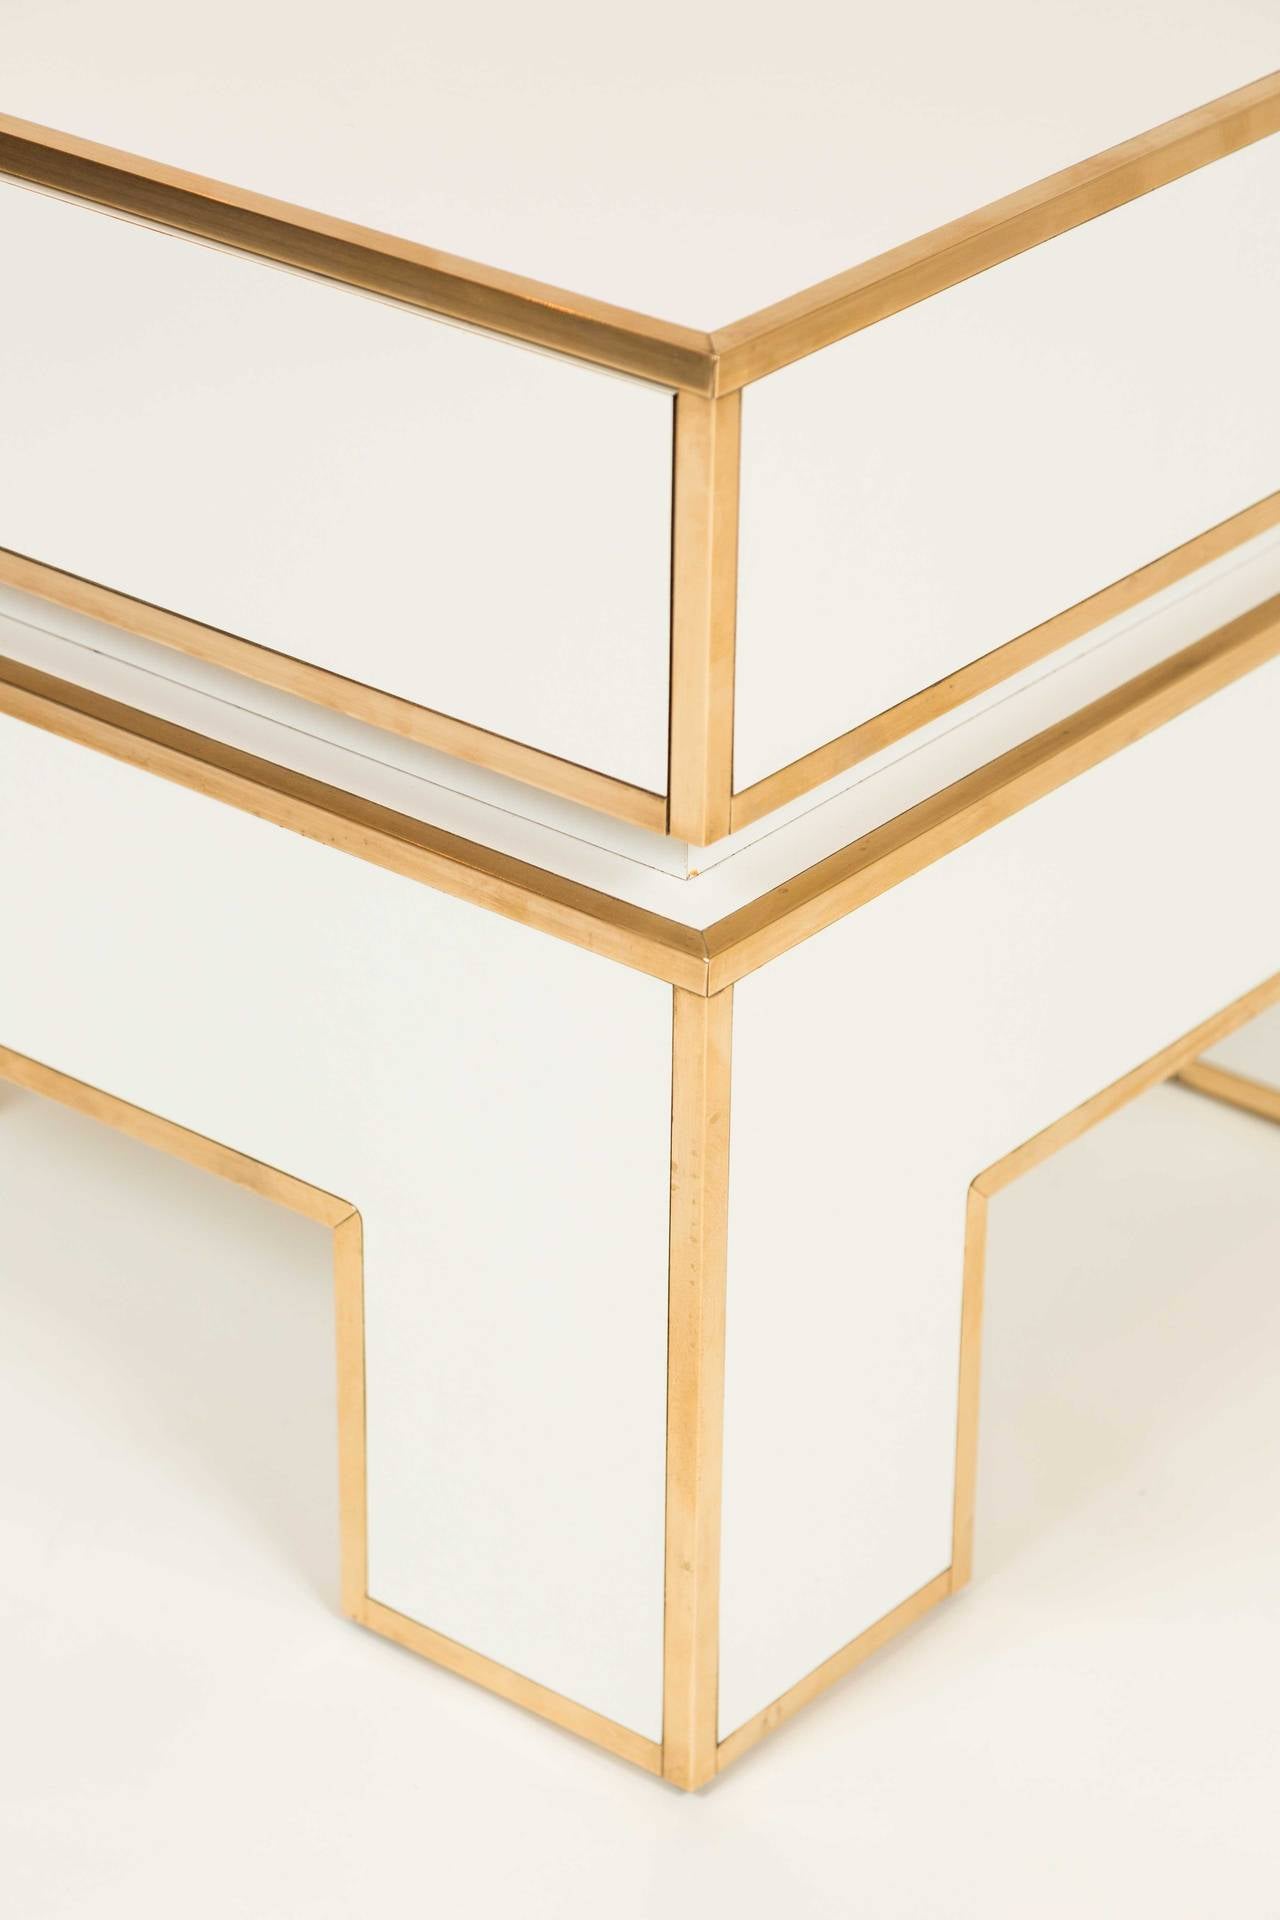 Pair of Chic Moderne French Side Tables by Alain Delon for Maison Jansen 1